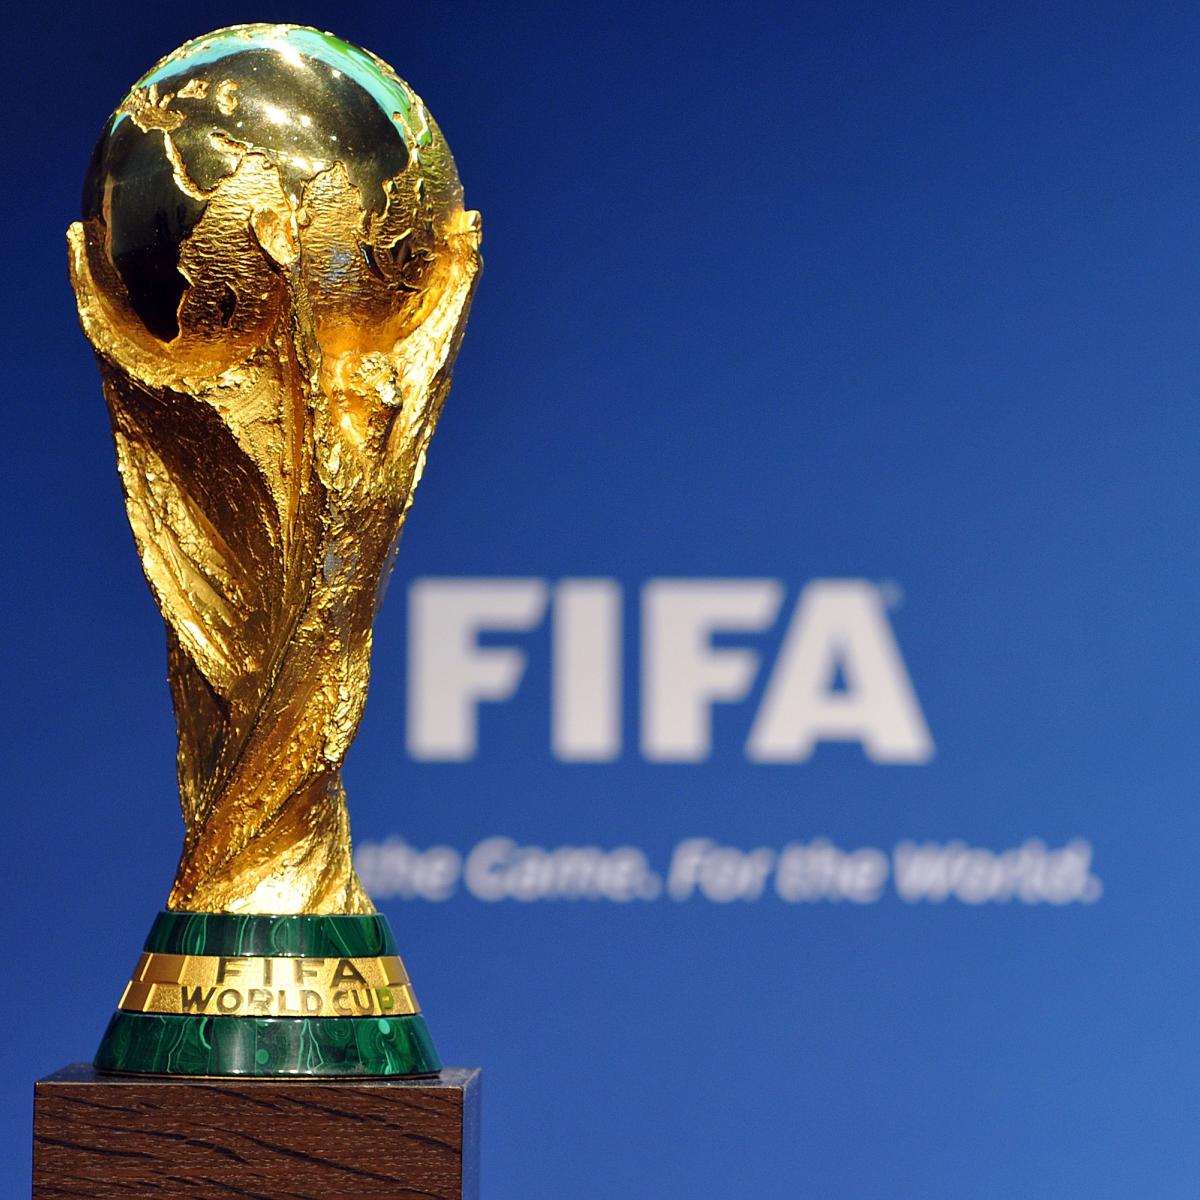 2014 World Cup Draw Pots Revealed, Updates on Prize Money, News, Scores,  Highlights, Stats, and Rumors